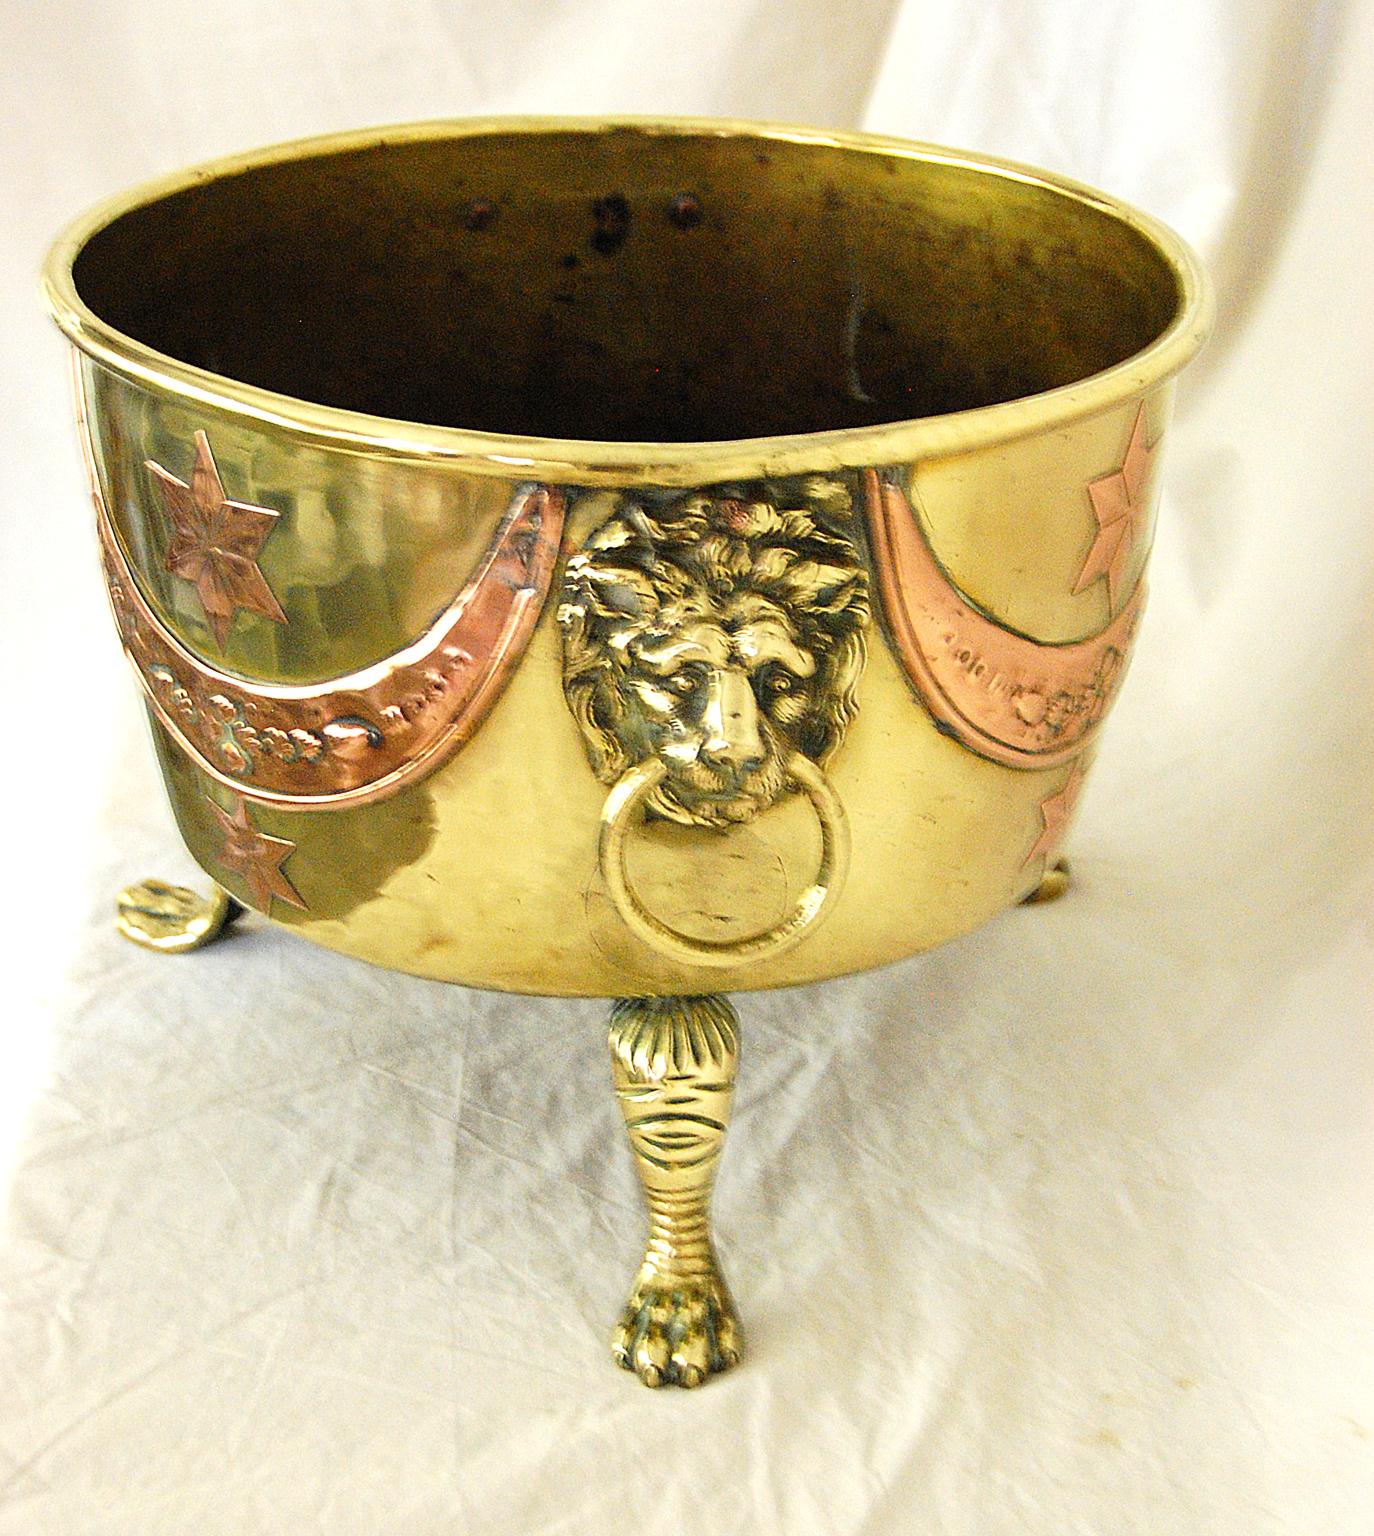 English Arts & Crafts period 19th century brass and copper footed jardinière or log bin. This heavy quality unusual brass footed jardinière is overlaid with swags and stars of repousse copper and has bold lion ring handles.